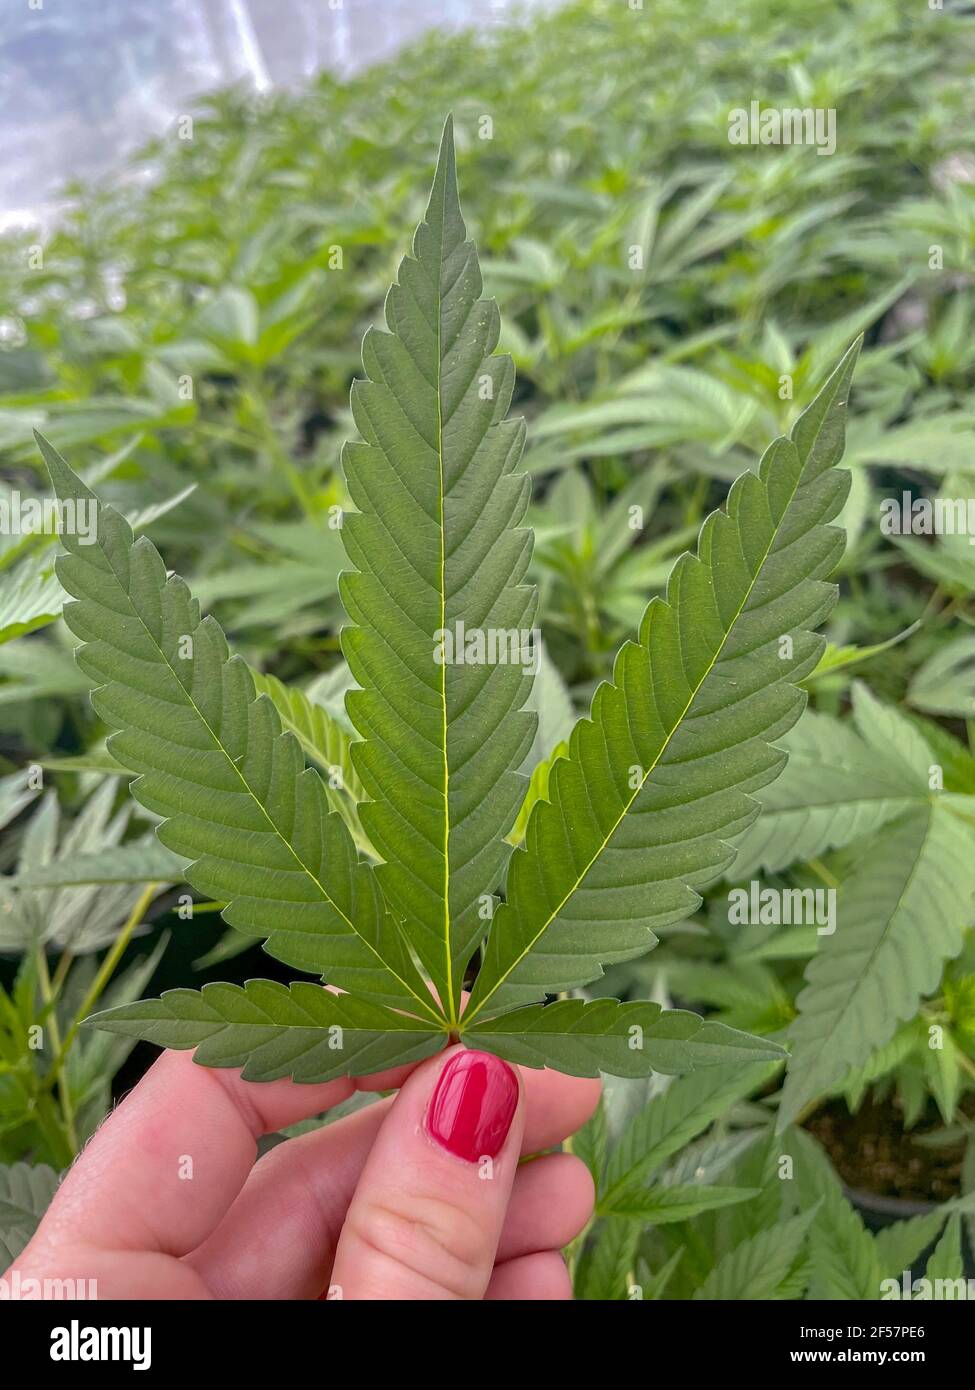 Cannabis leaf in a girl's hand. Cannabis plantation, legal marijuana in a greenhouse. potted plants, hemp Stock Photo